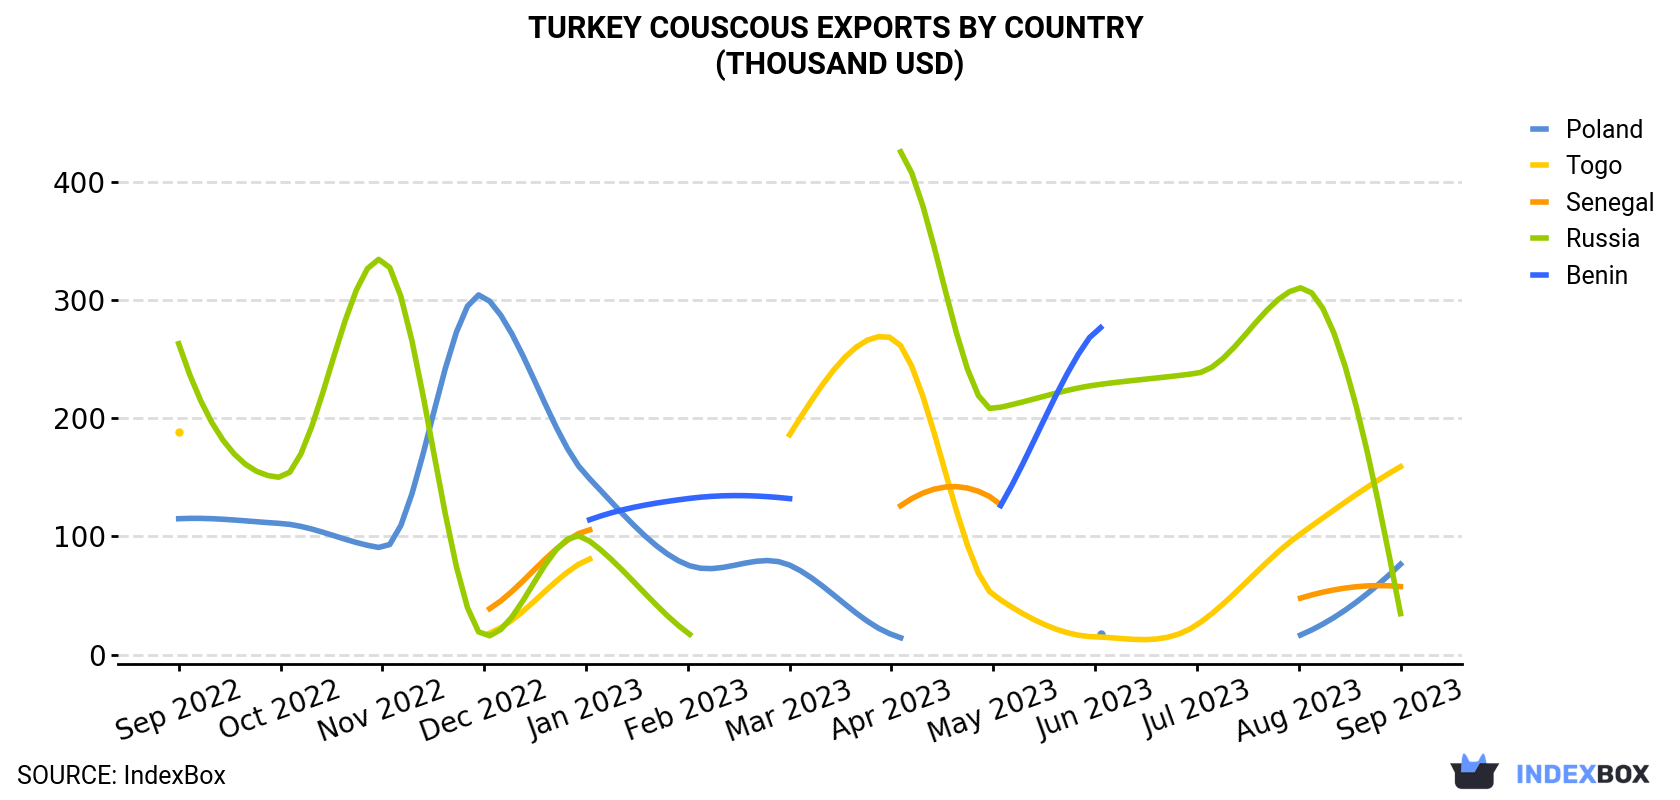 Turkey Couscous Exports By Country (Thousand USD)